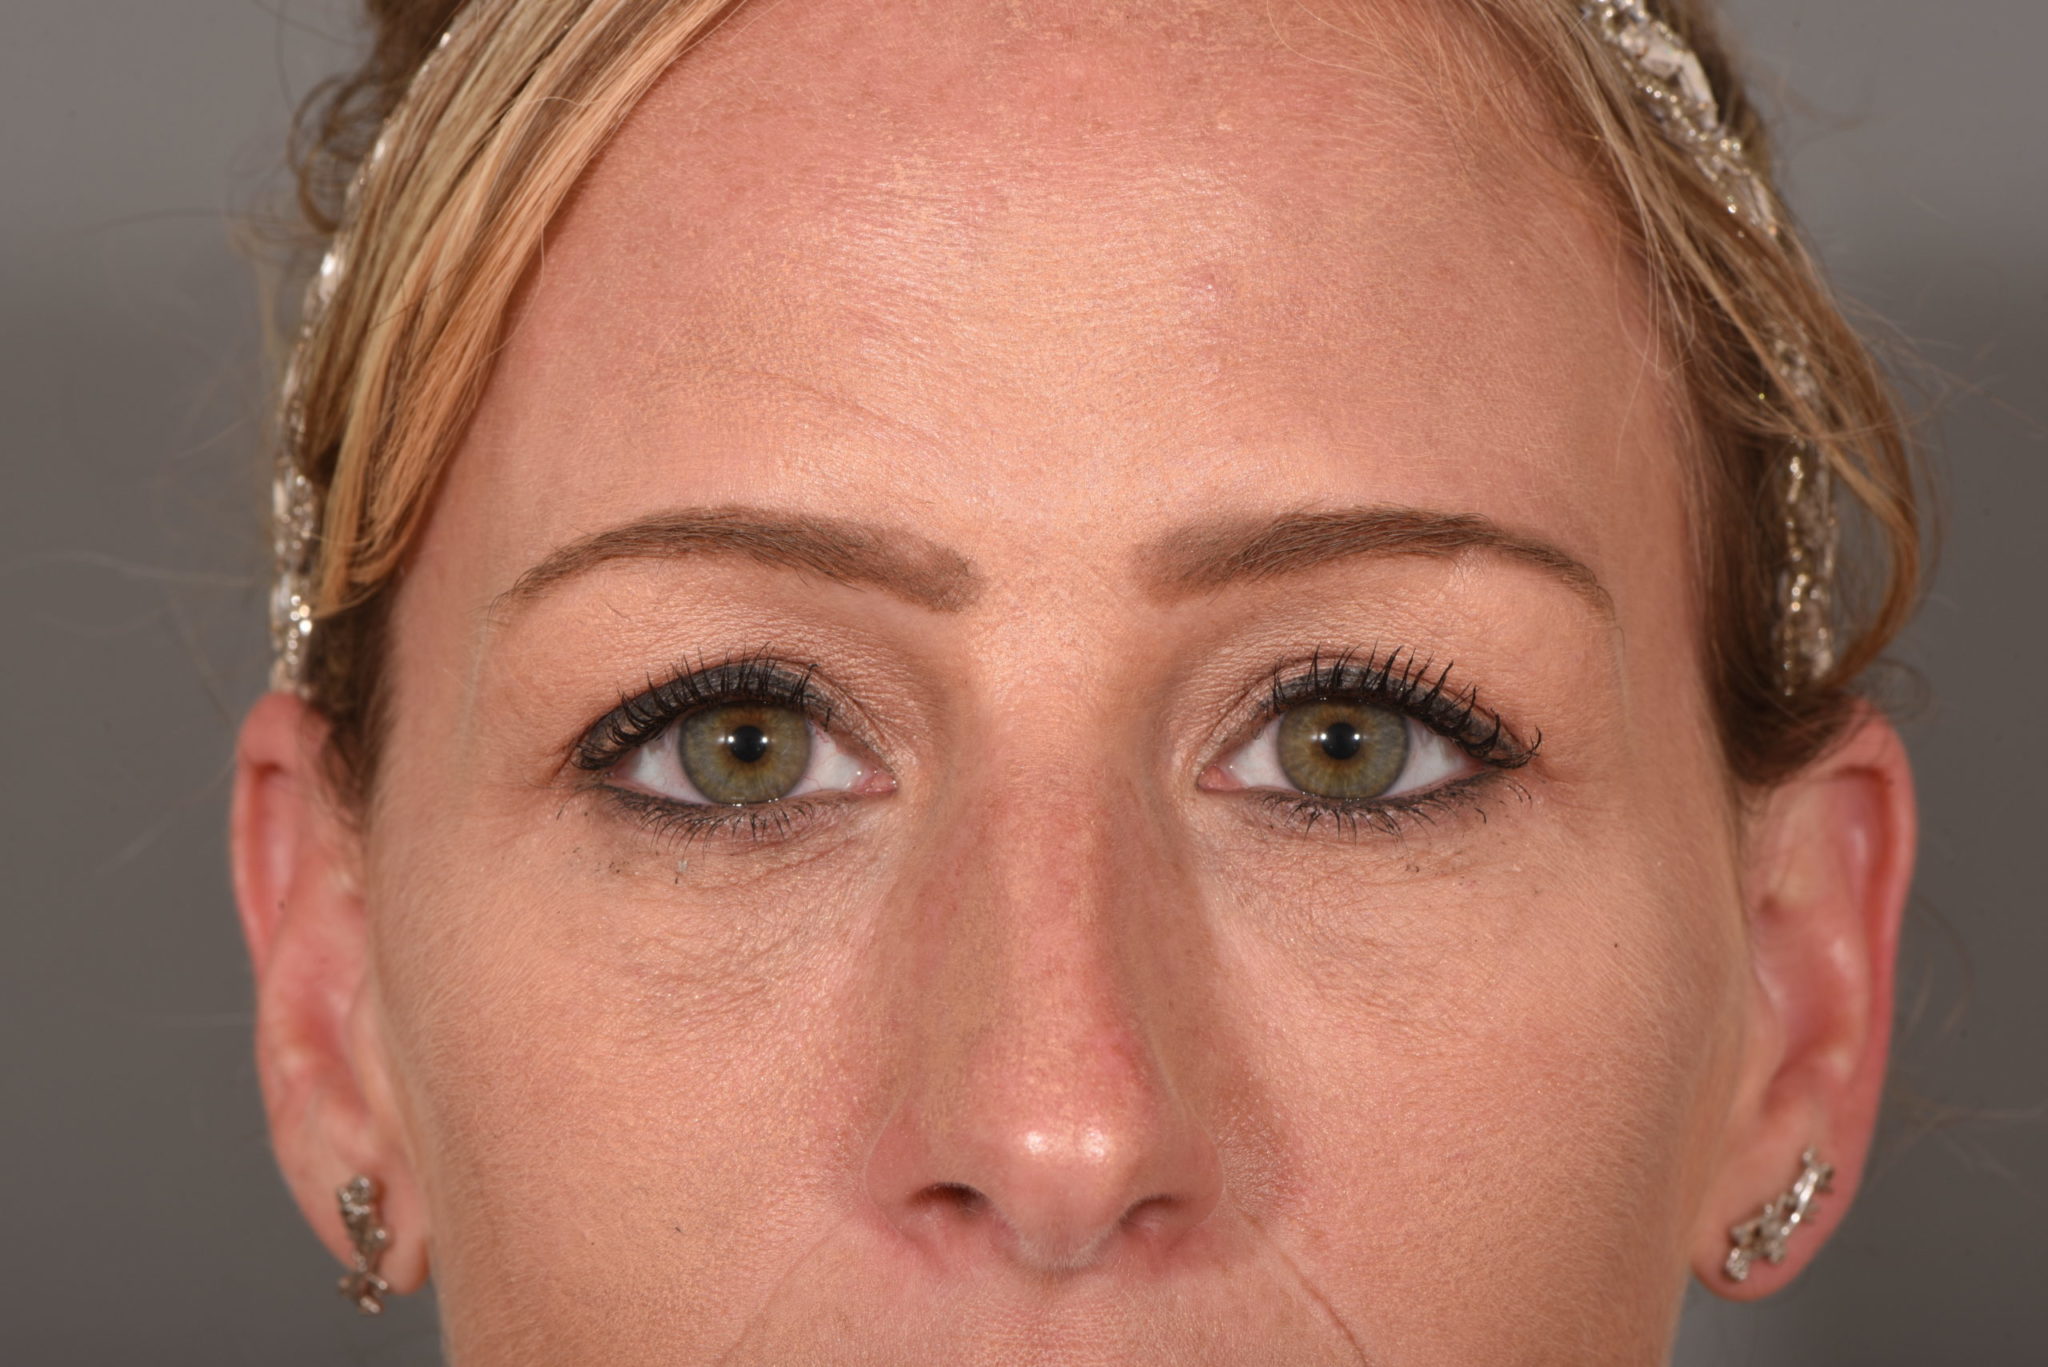 Fillers Patient Photo - Case 5748 - after view